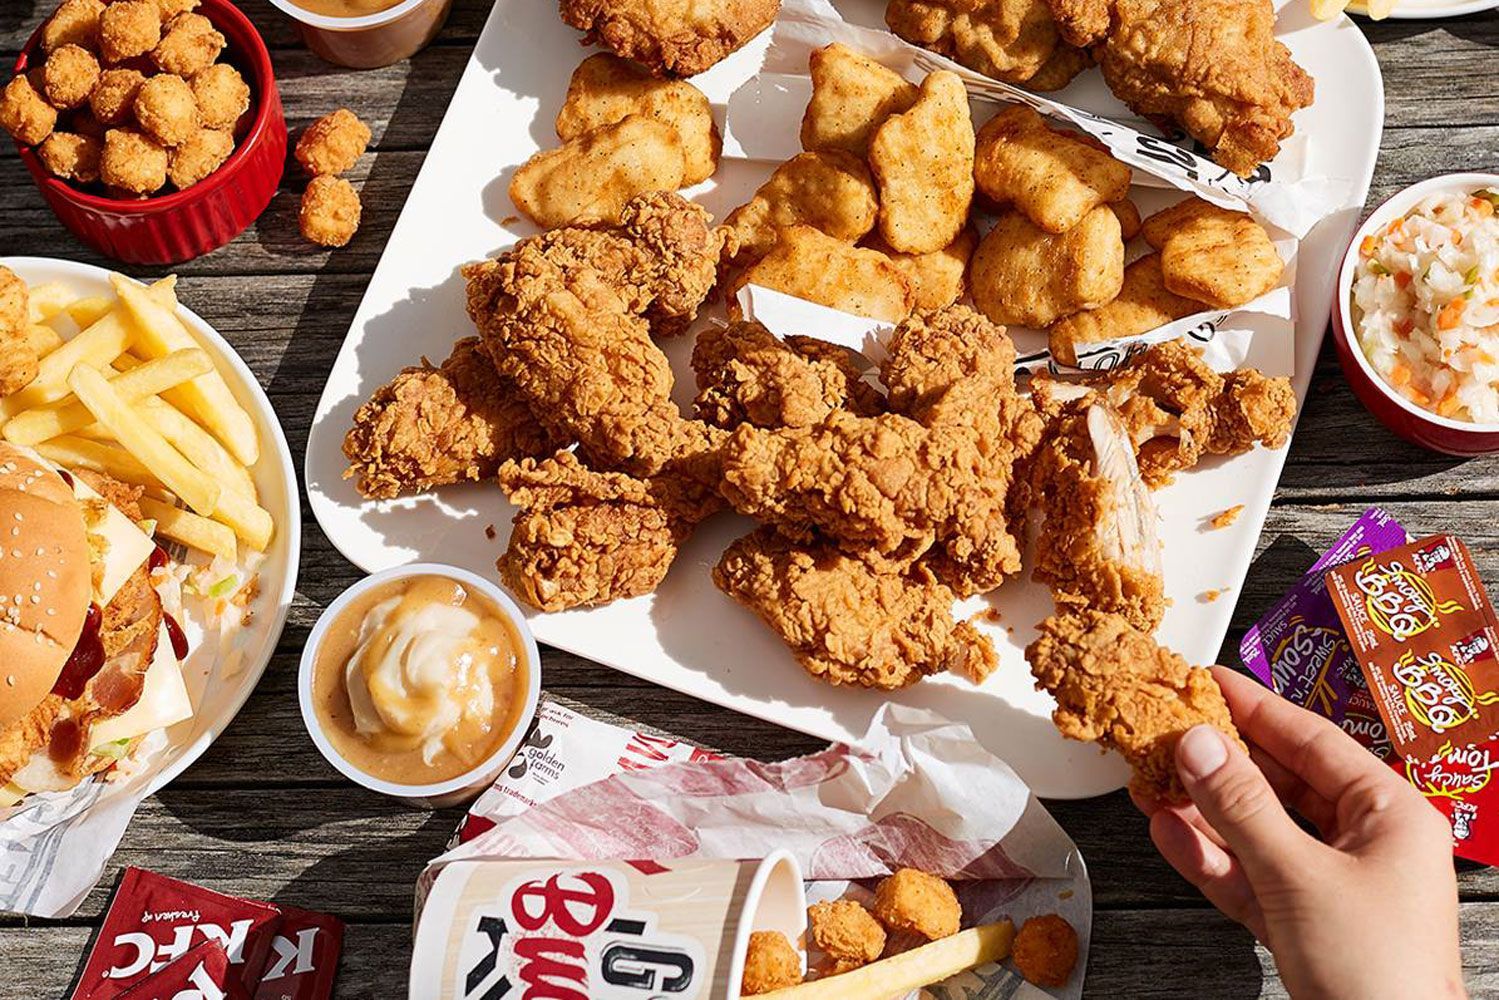 I Challenge You to Score at Least 14/20 on This General Knowledge Quiz Kfc Fast Food Meal